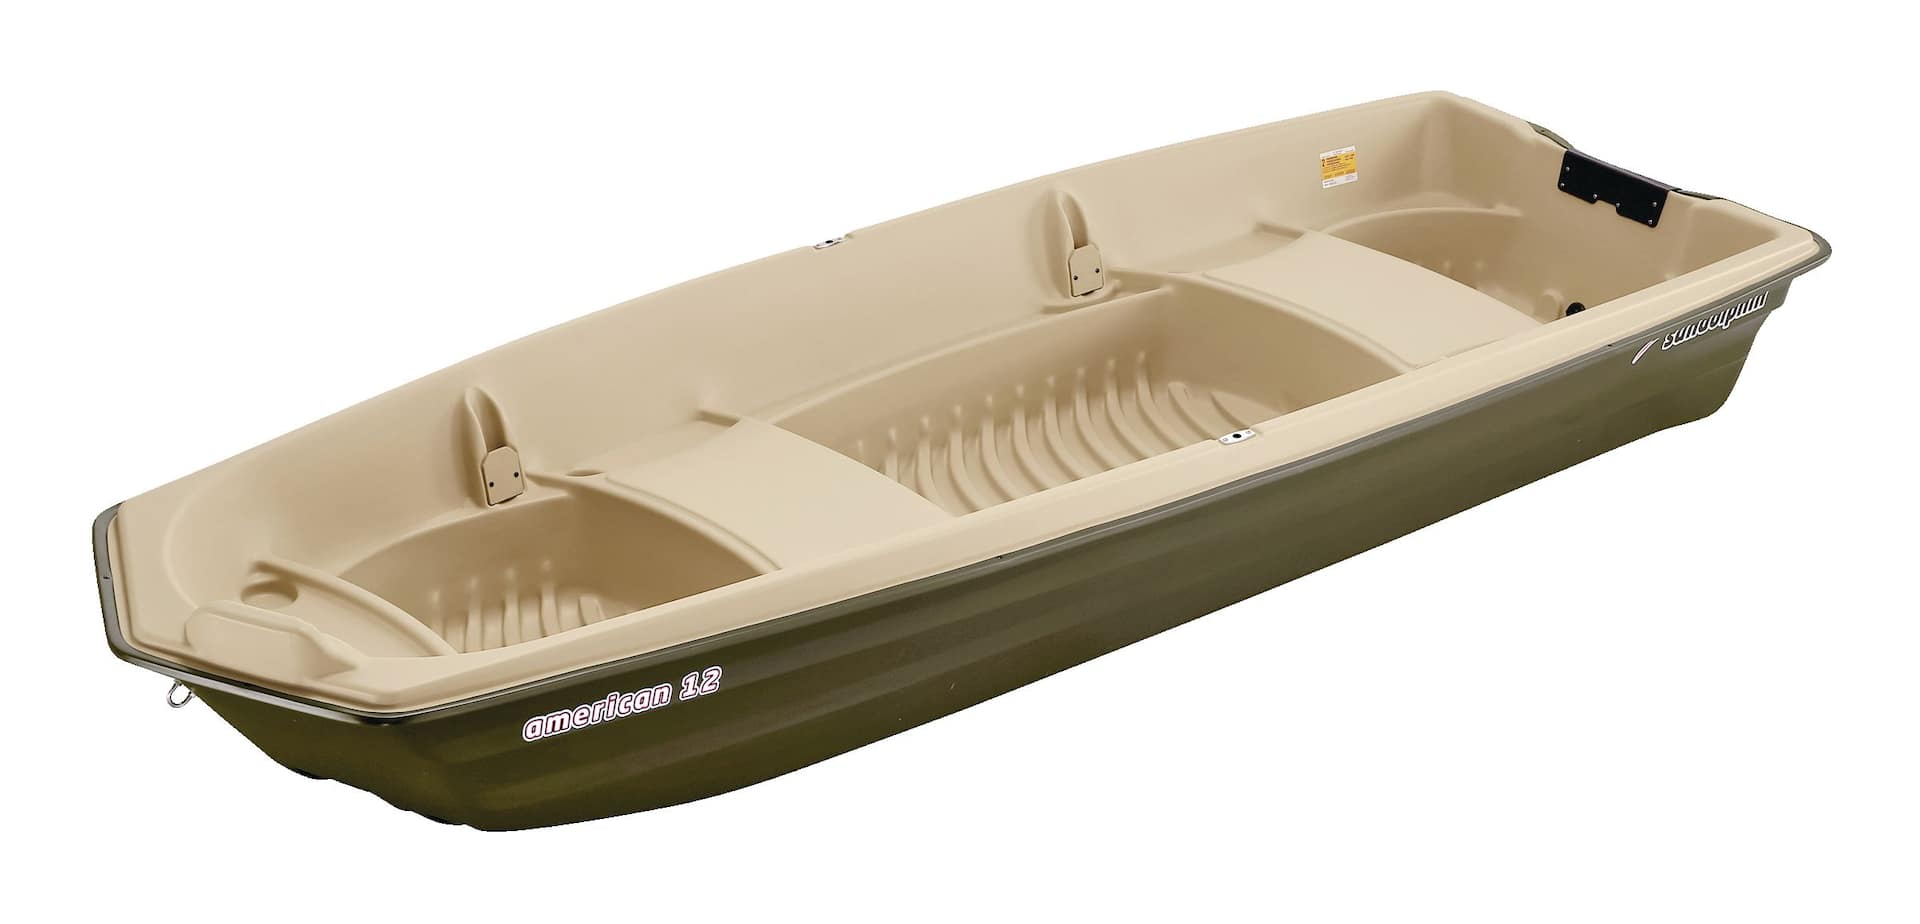 Wholesale sale lund boat seat For Your Marine Activities 